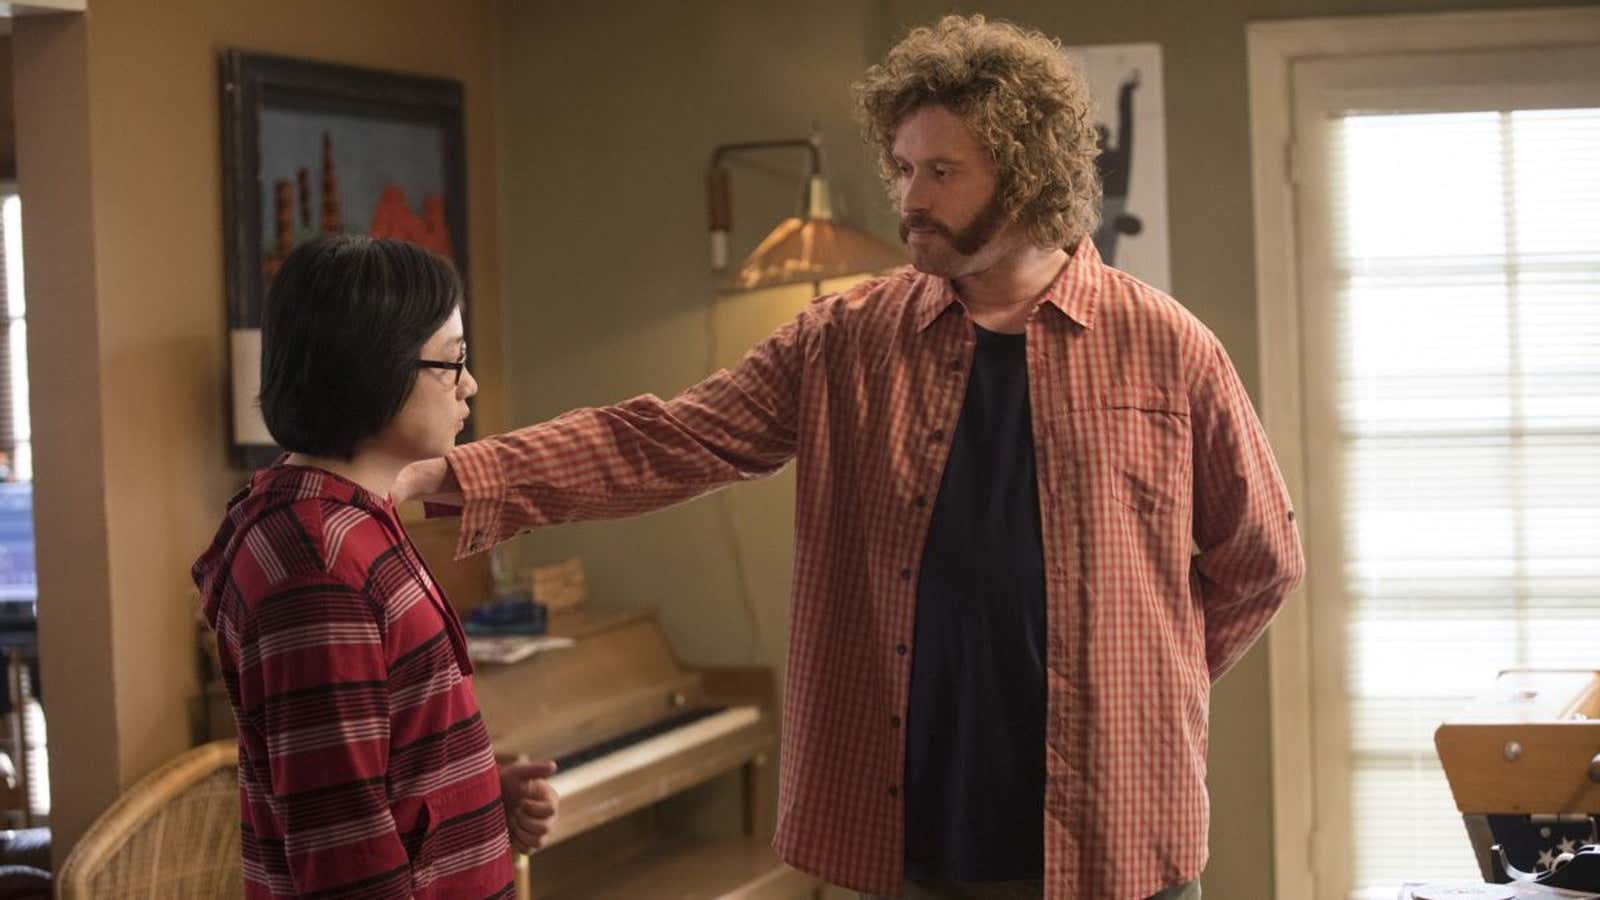 In HBO’s Silicon Valley, Erlich (T.J. Miller) pitches Jian-Yang’s (Jimmy O. Yang) app as a “Shazam for food.”